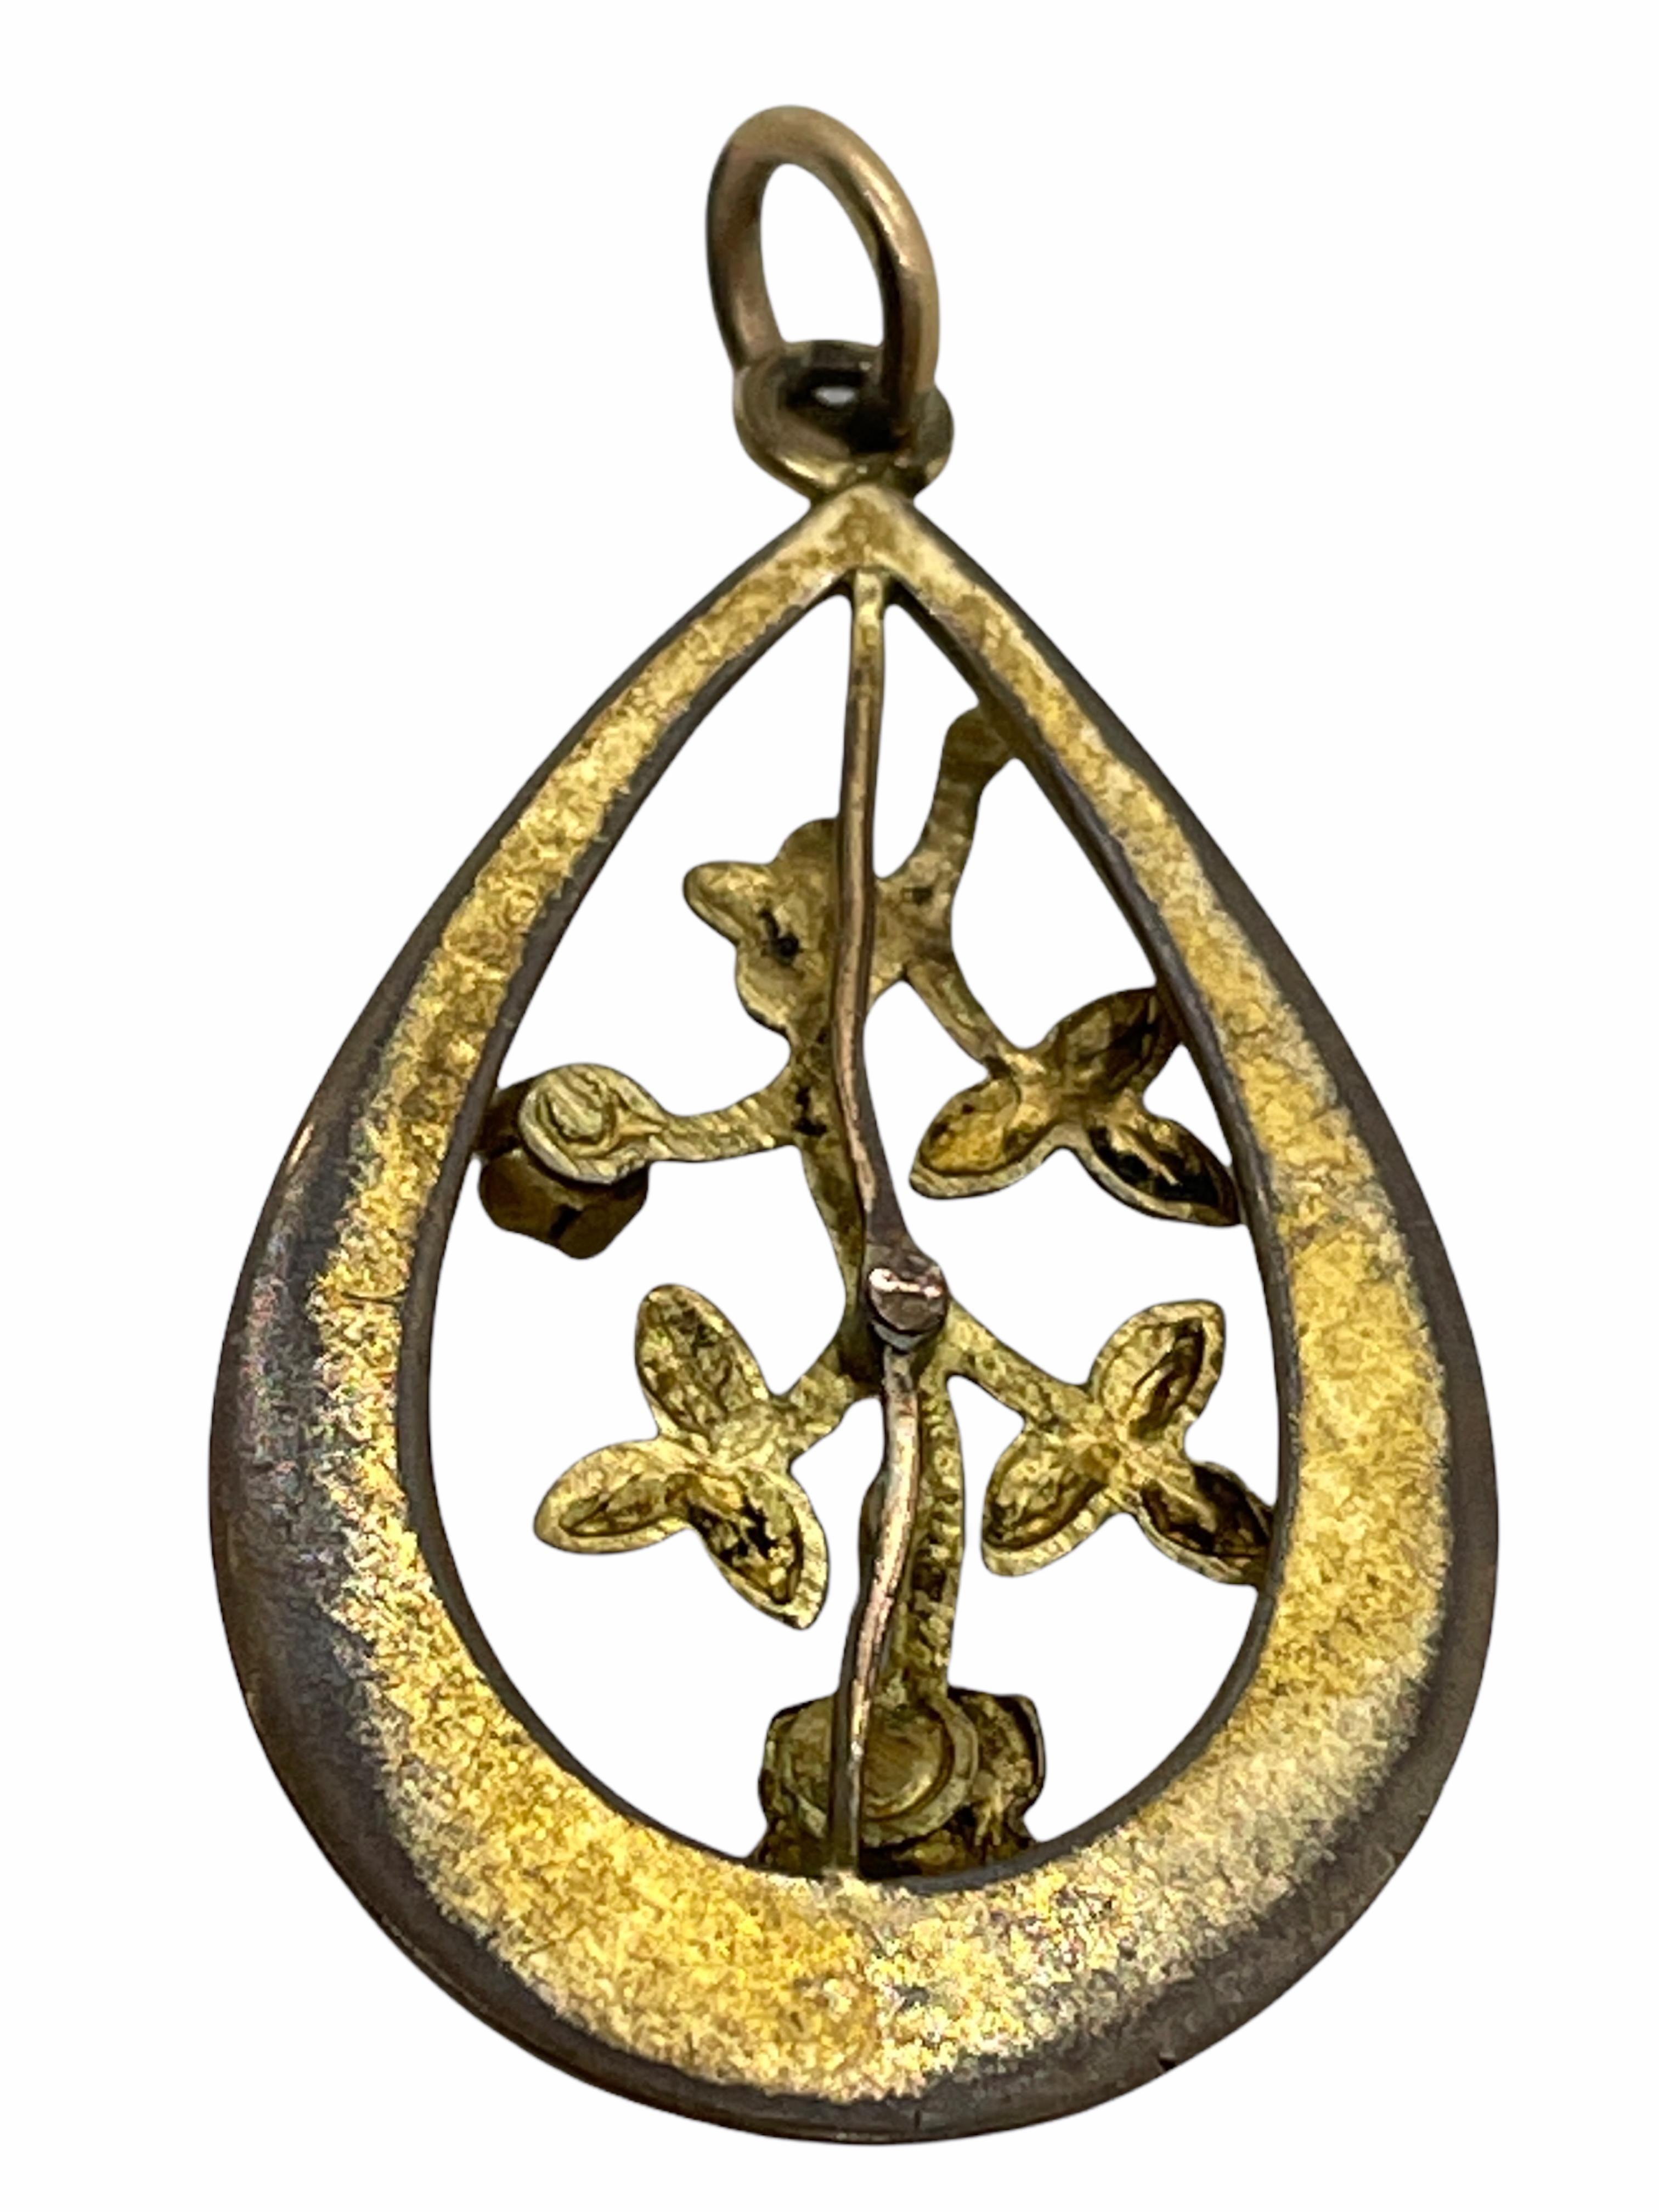 This lovely stylish pendant or hanger was made to hang on a chain. Made in Germany, circa 1900.
A very pretty piece of antique jewellery which would make a fine addition to any collection. It is approximate 1 1/2